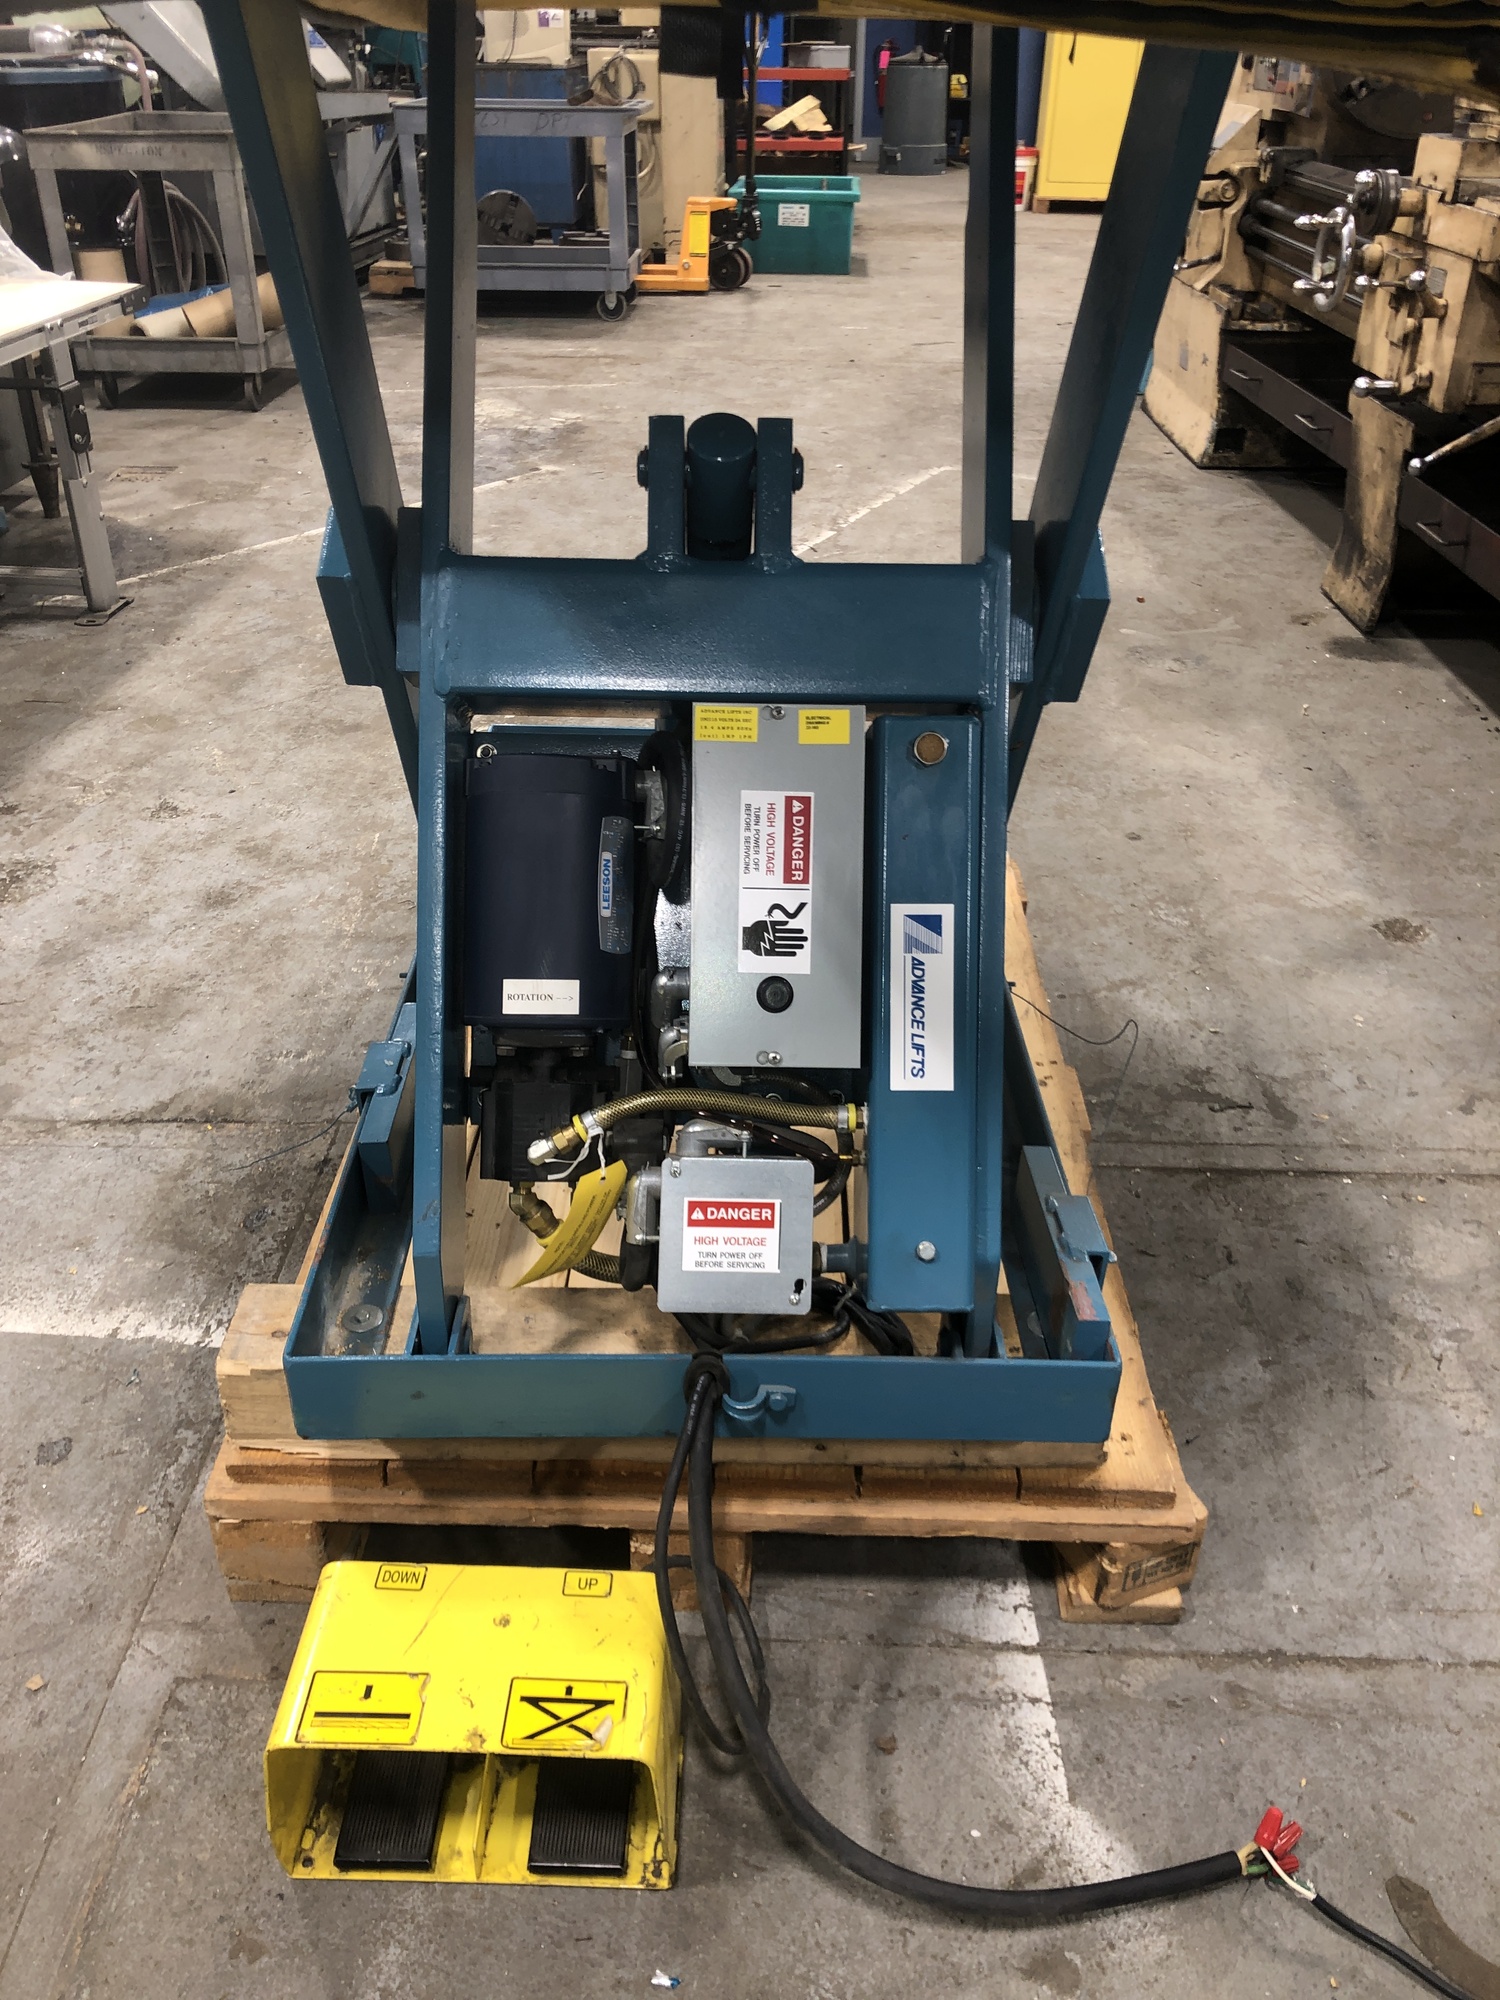 2007 ADVANCE LIFTS P-2536-Z Forklift Trucks | New England Industrial Machinery